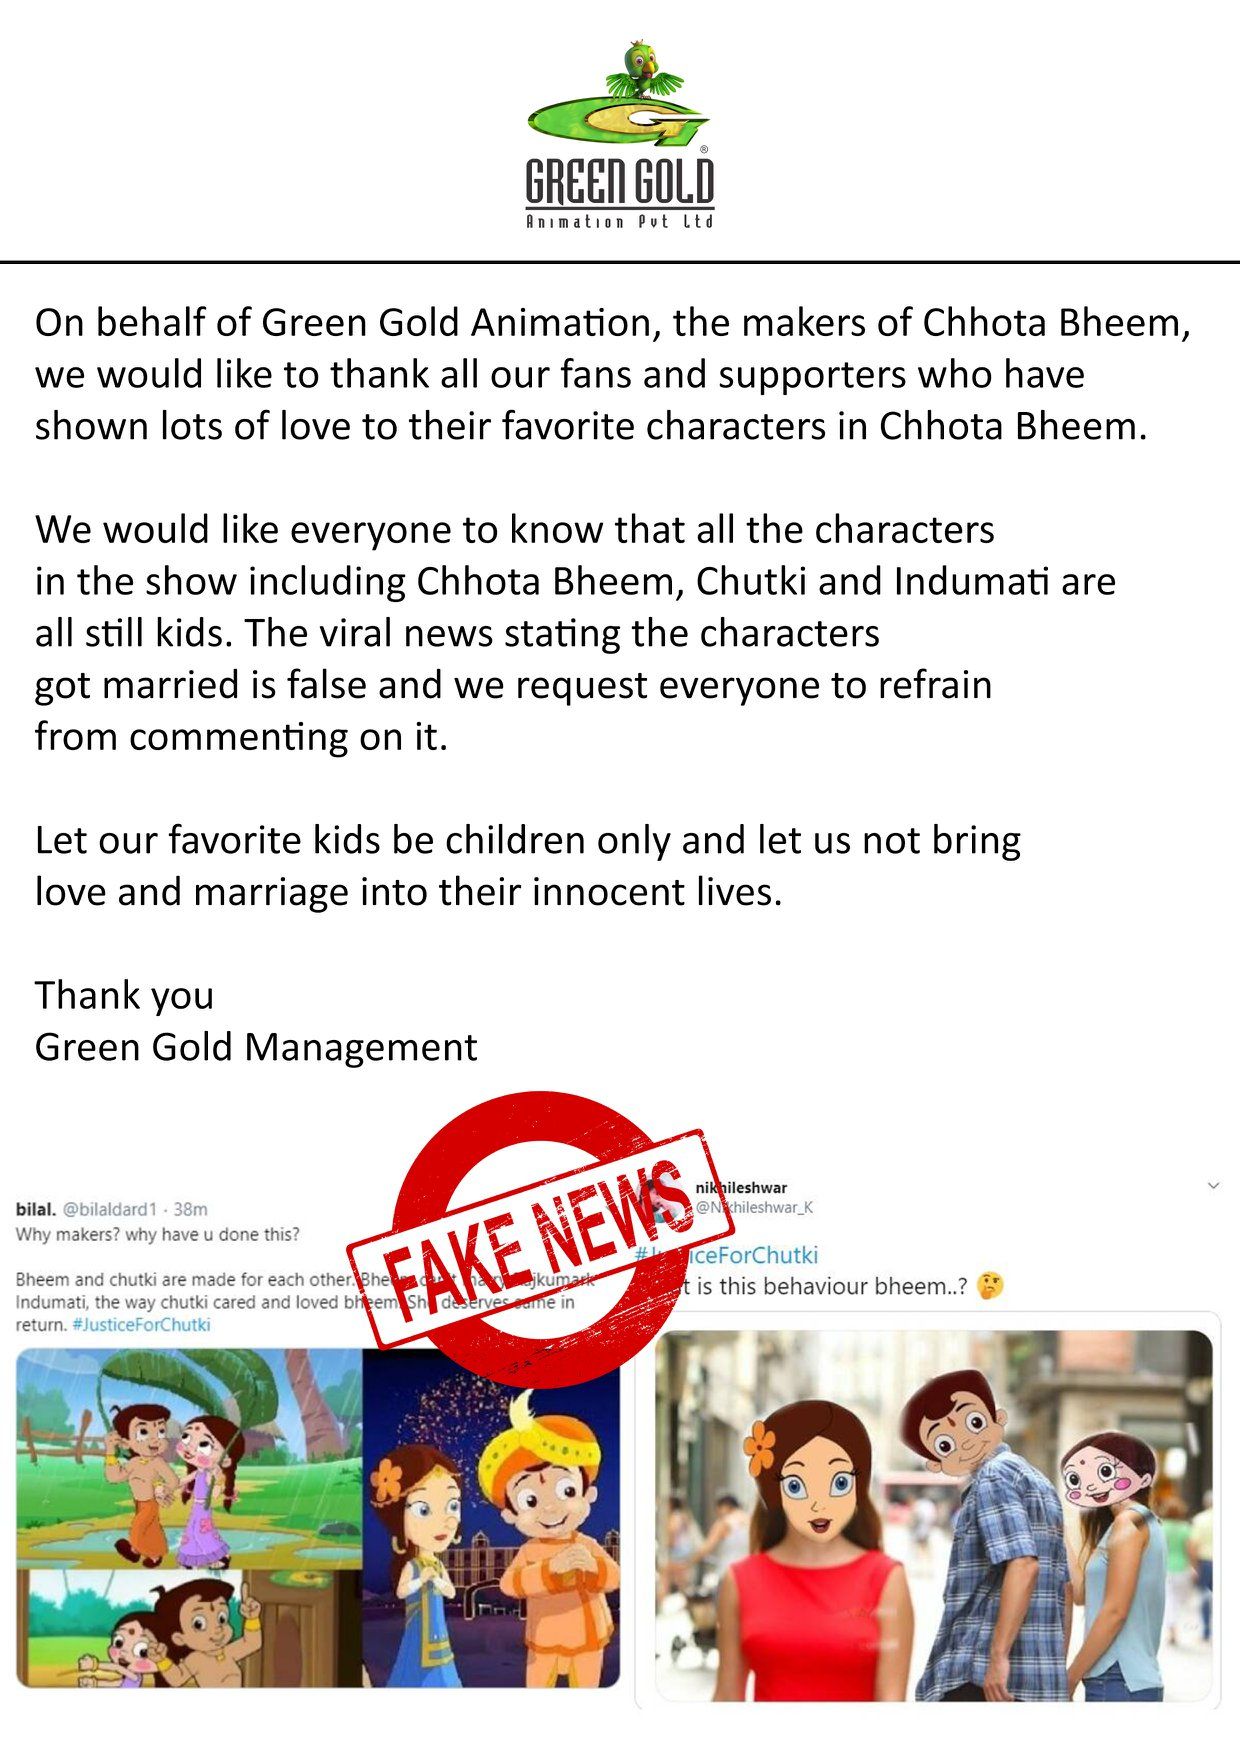 Relief For Those Seeking #JusticeForChutki on Twitter as Makers Confirm  Chhota Bheem Isn't Marrying Indumati 